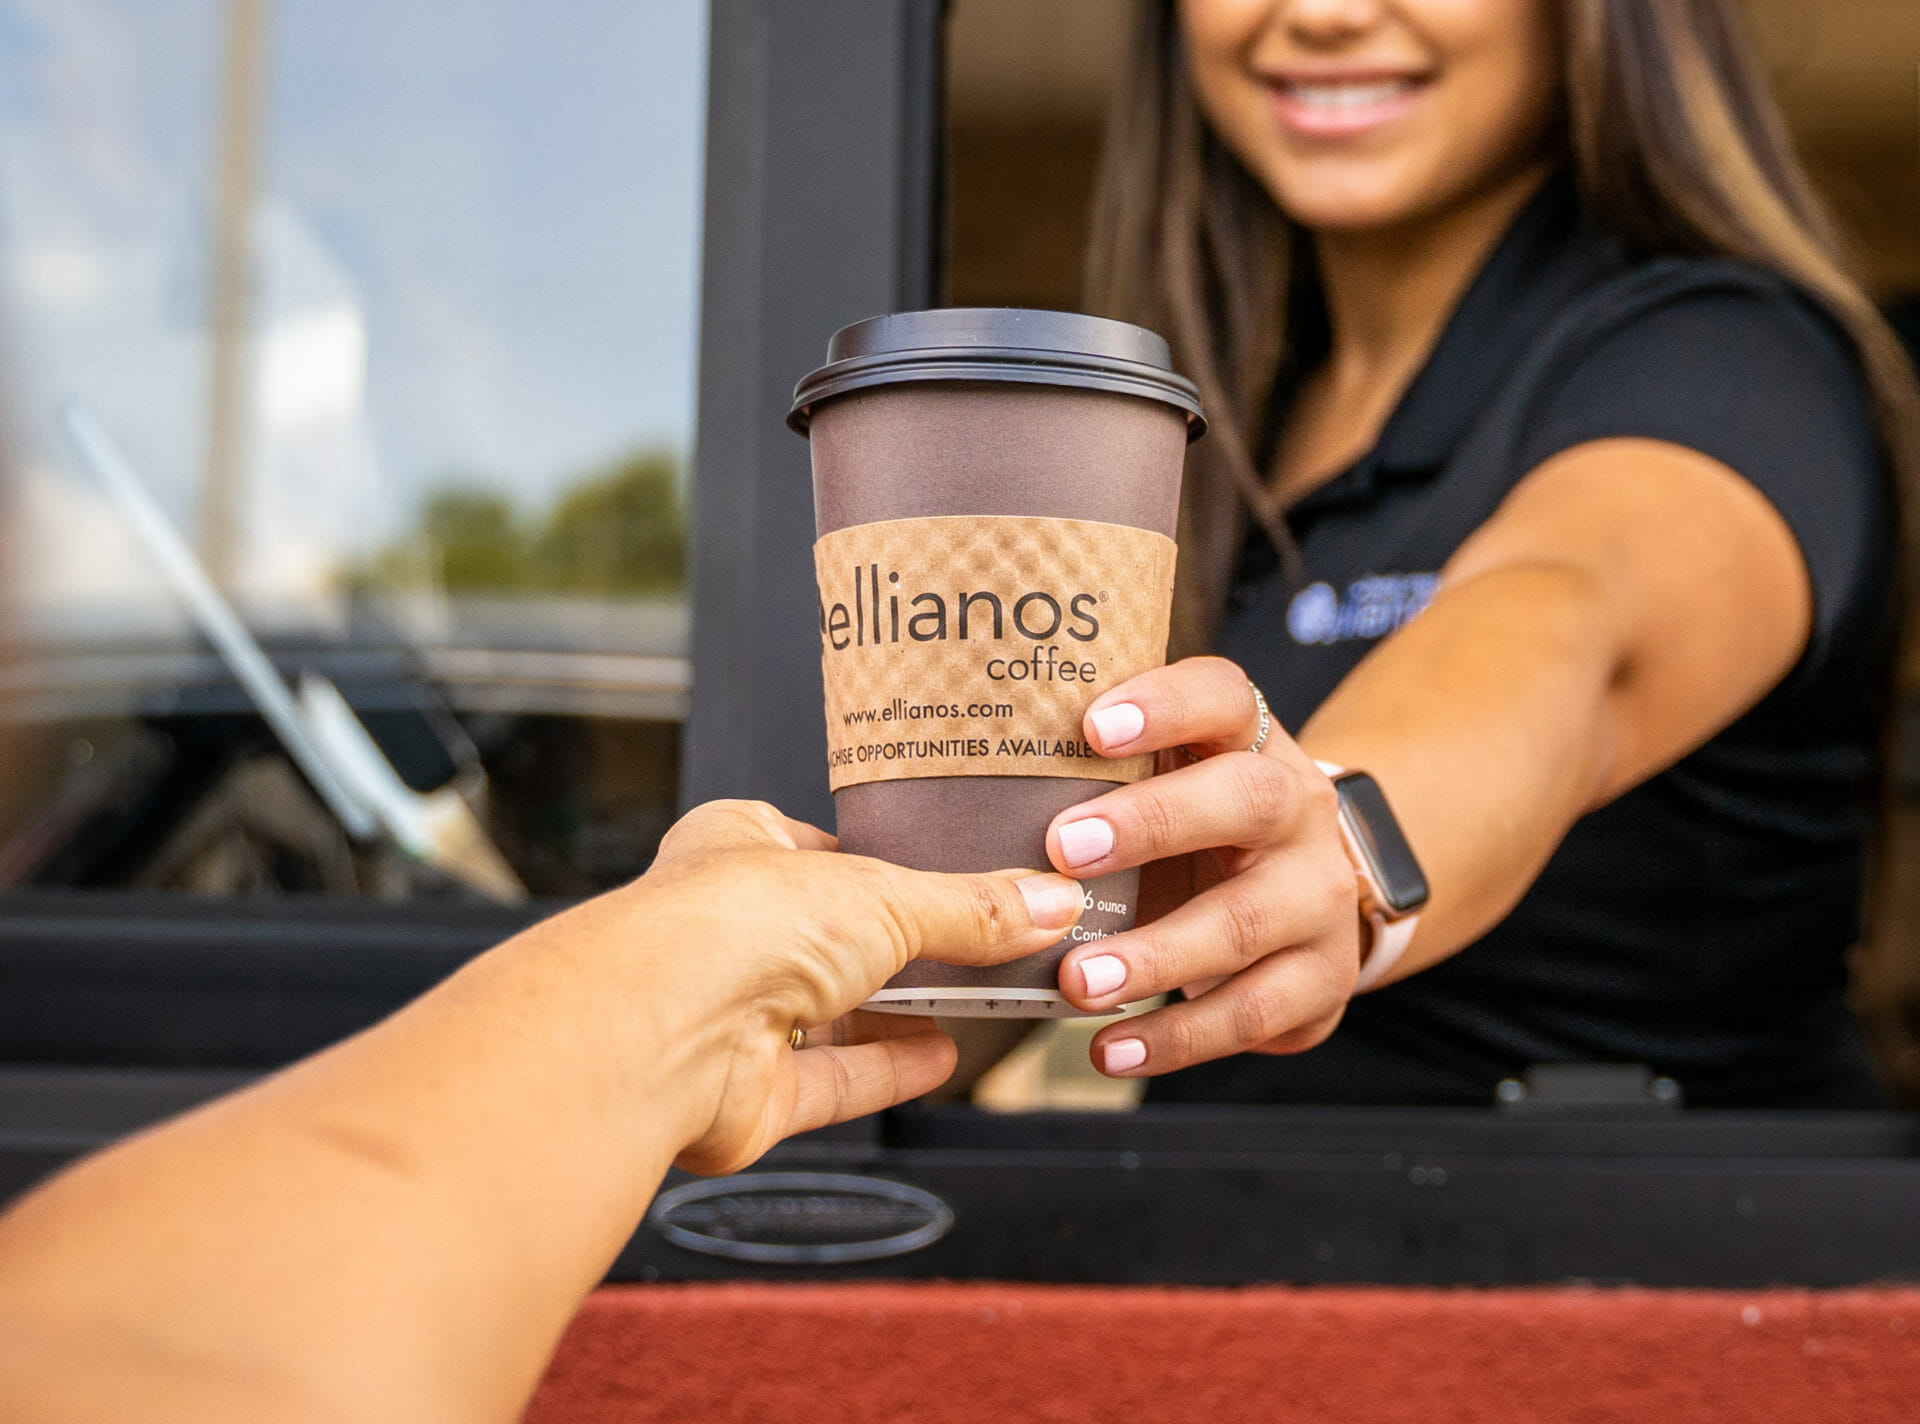 Ellianos Coffee Drive-Thru Coffee Franchise Opening Soon in St. Johns, Florida